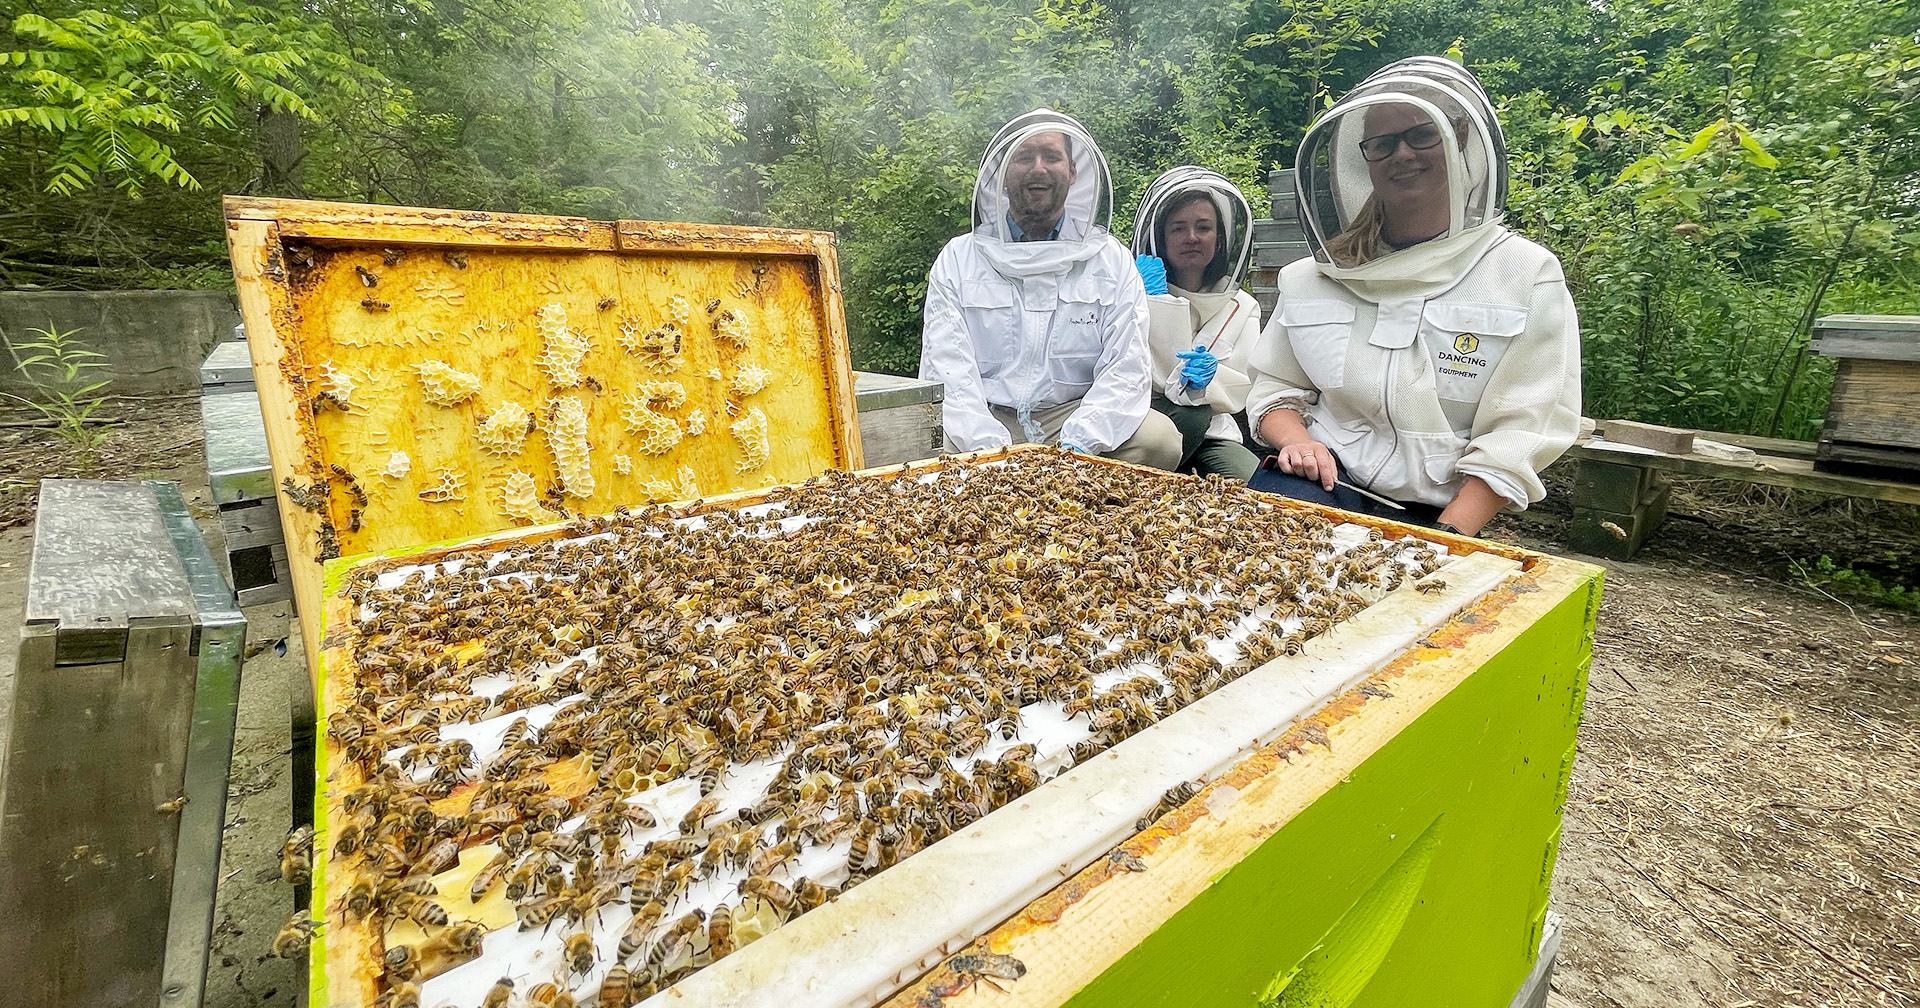 Research team with bees